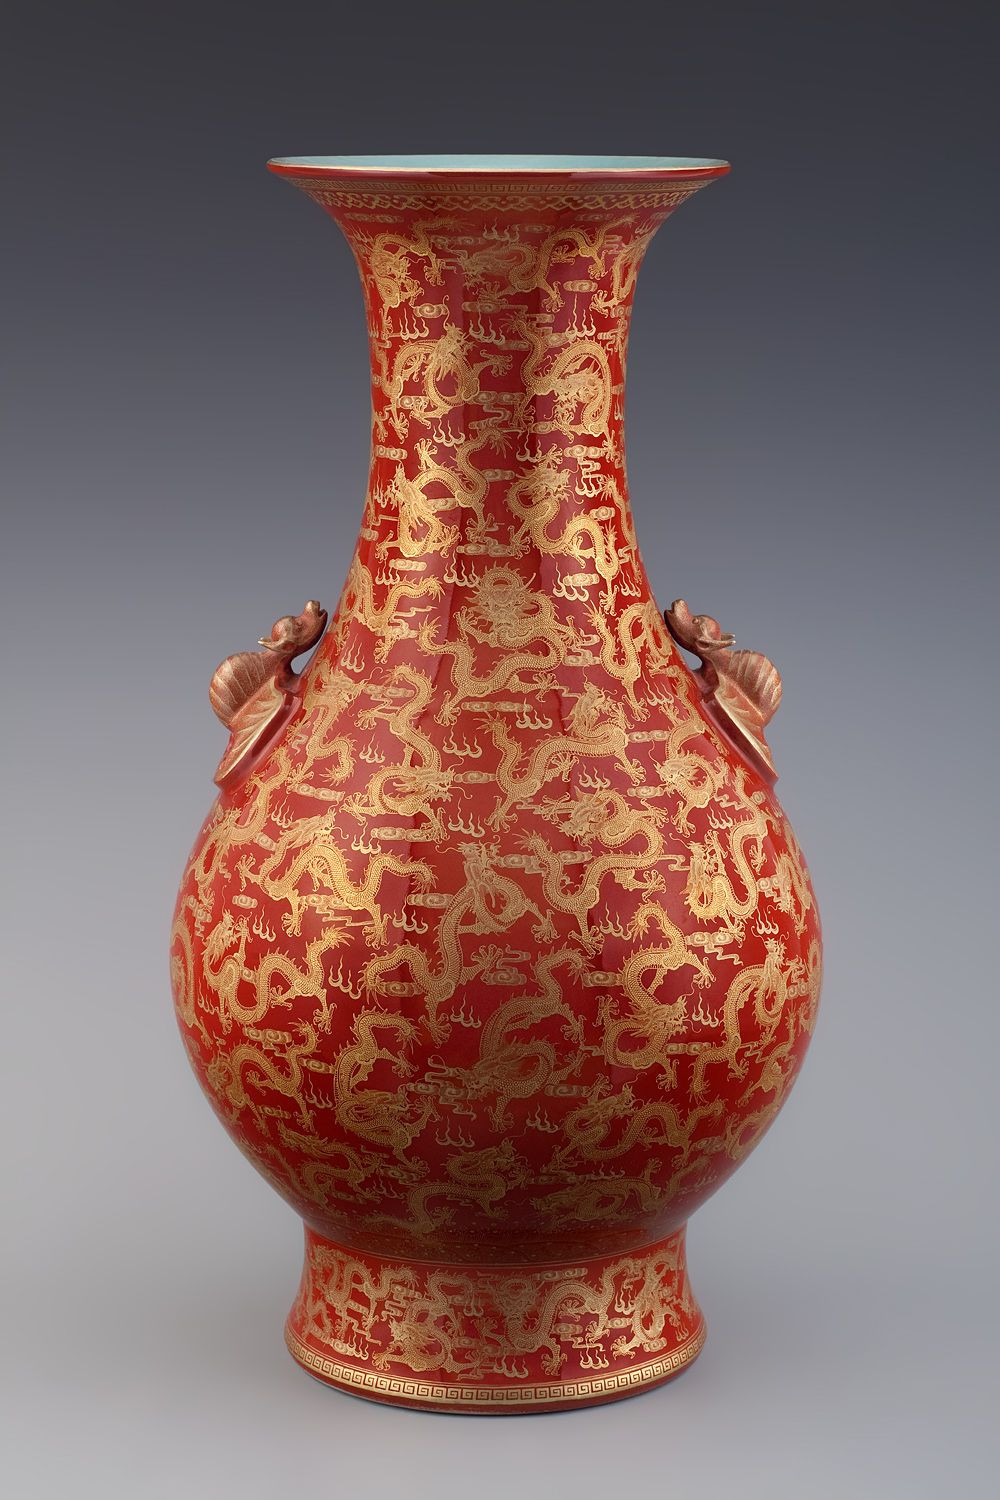 21 attractive Tall Thin Gold Vase 2024 free download tall thin gold vase of pin by ic280 on ancient china pinterest ancient china and pottery regarding 8ecc0db878825d66fb41bfba7a47df2f